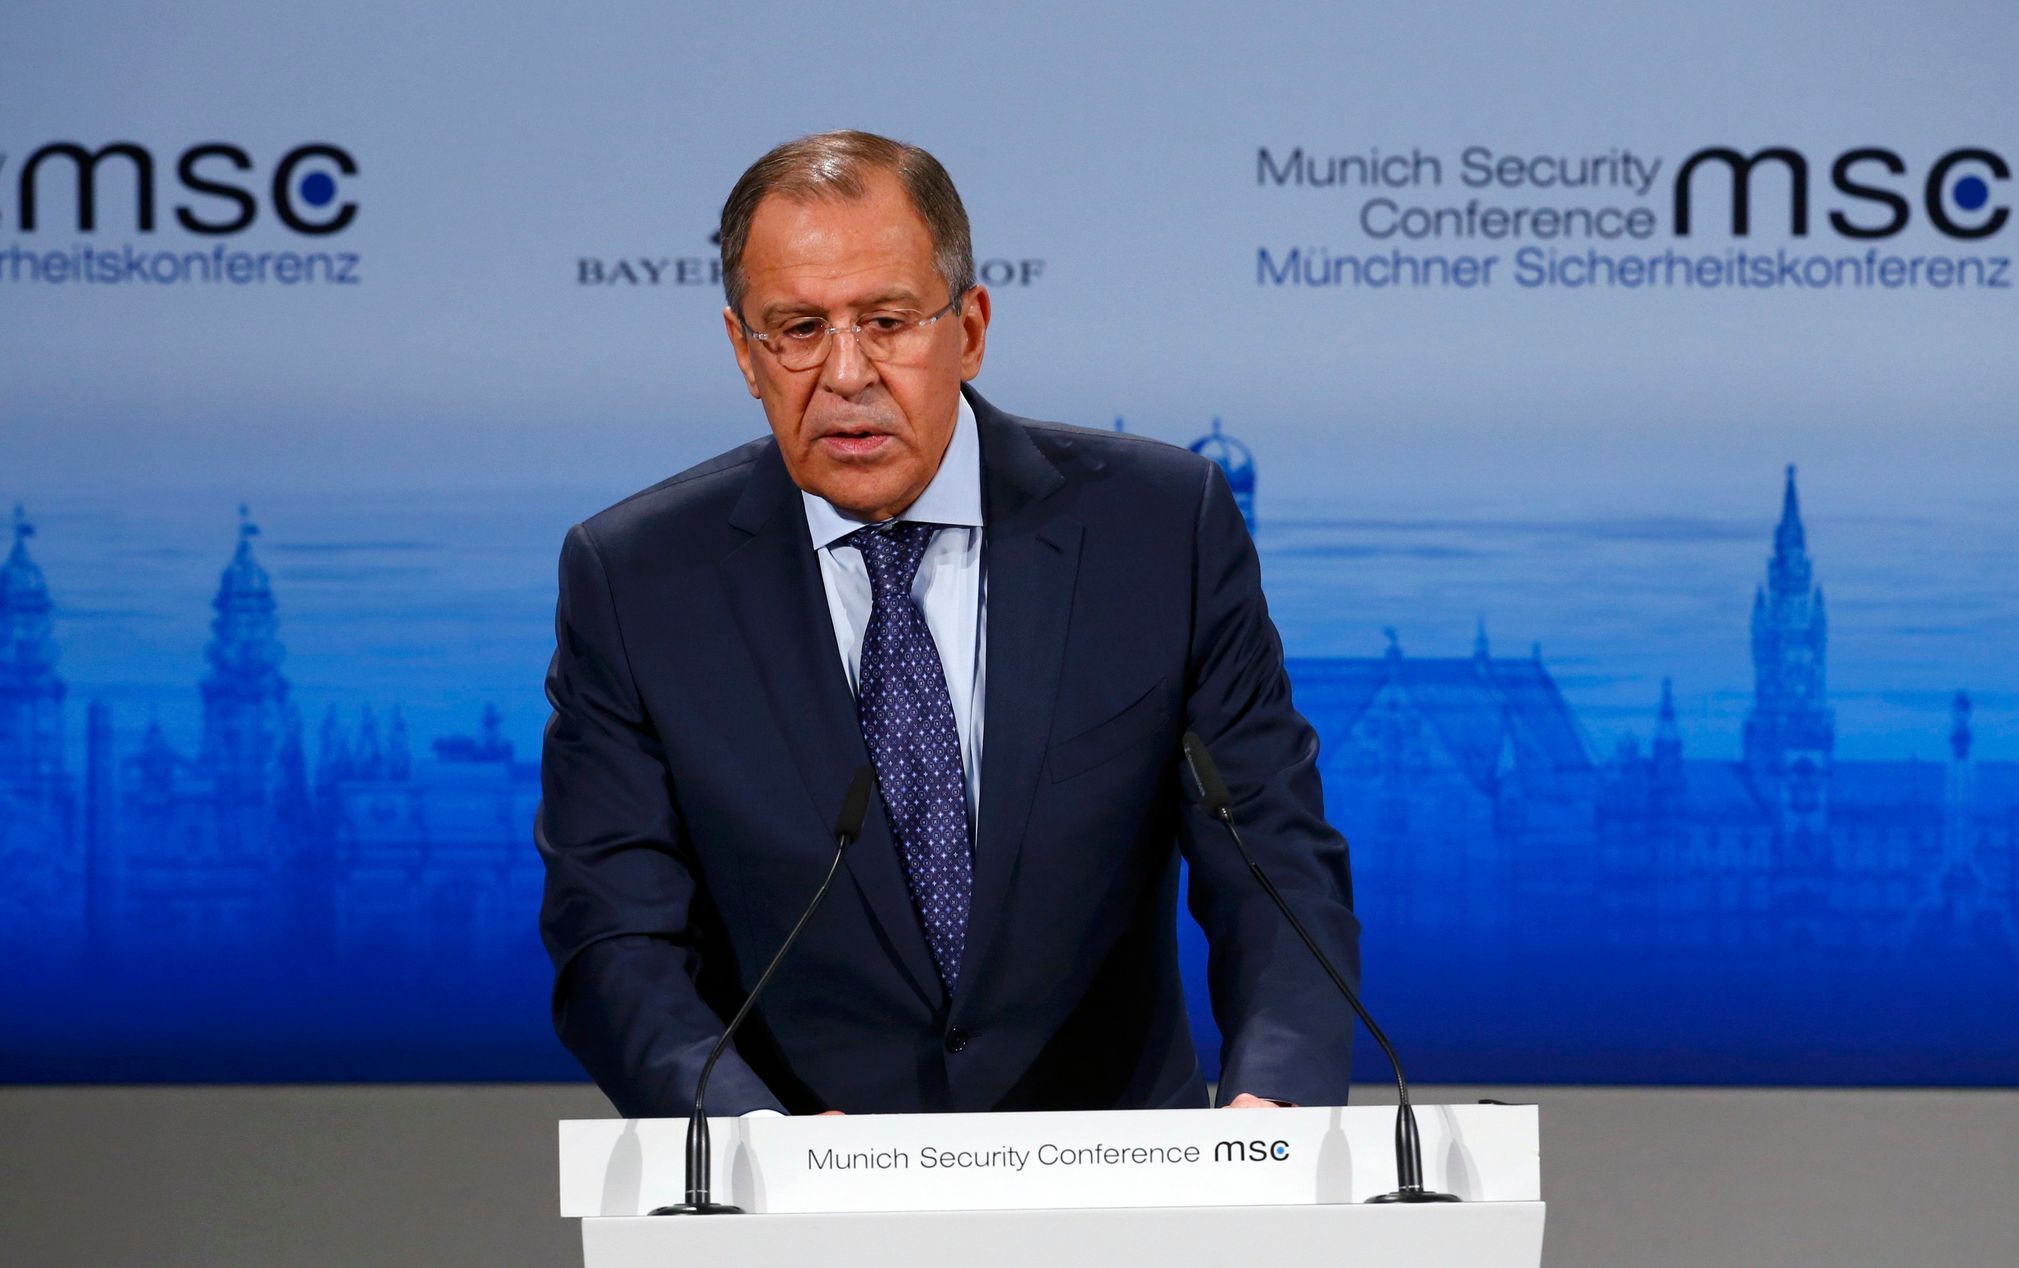 Russian Foreign Minister Lavrov addresses during the 51st Munich Security Conference at the 'Bayerischer Hof' hotel in Munich